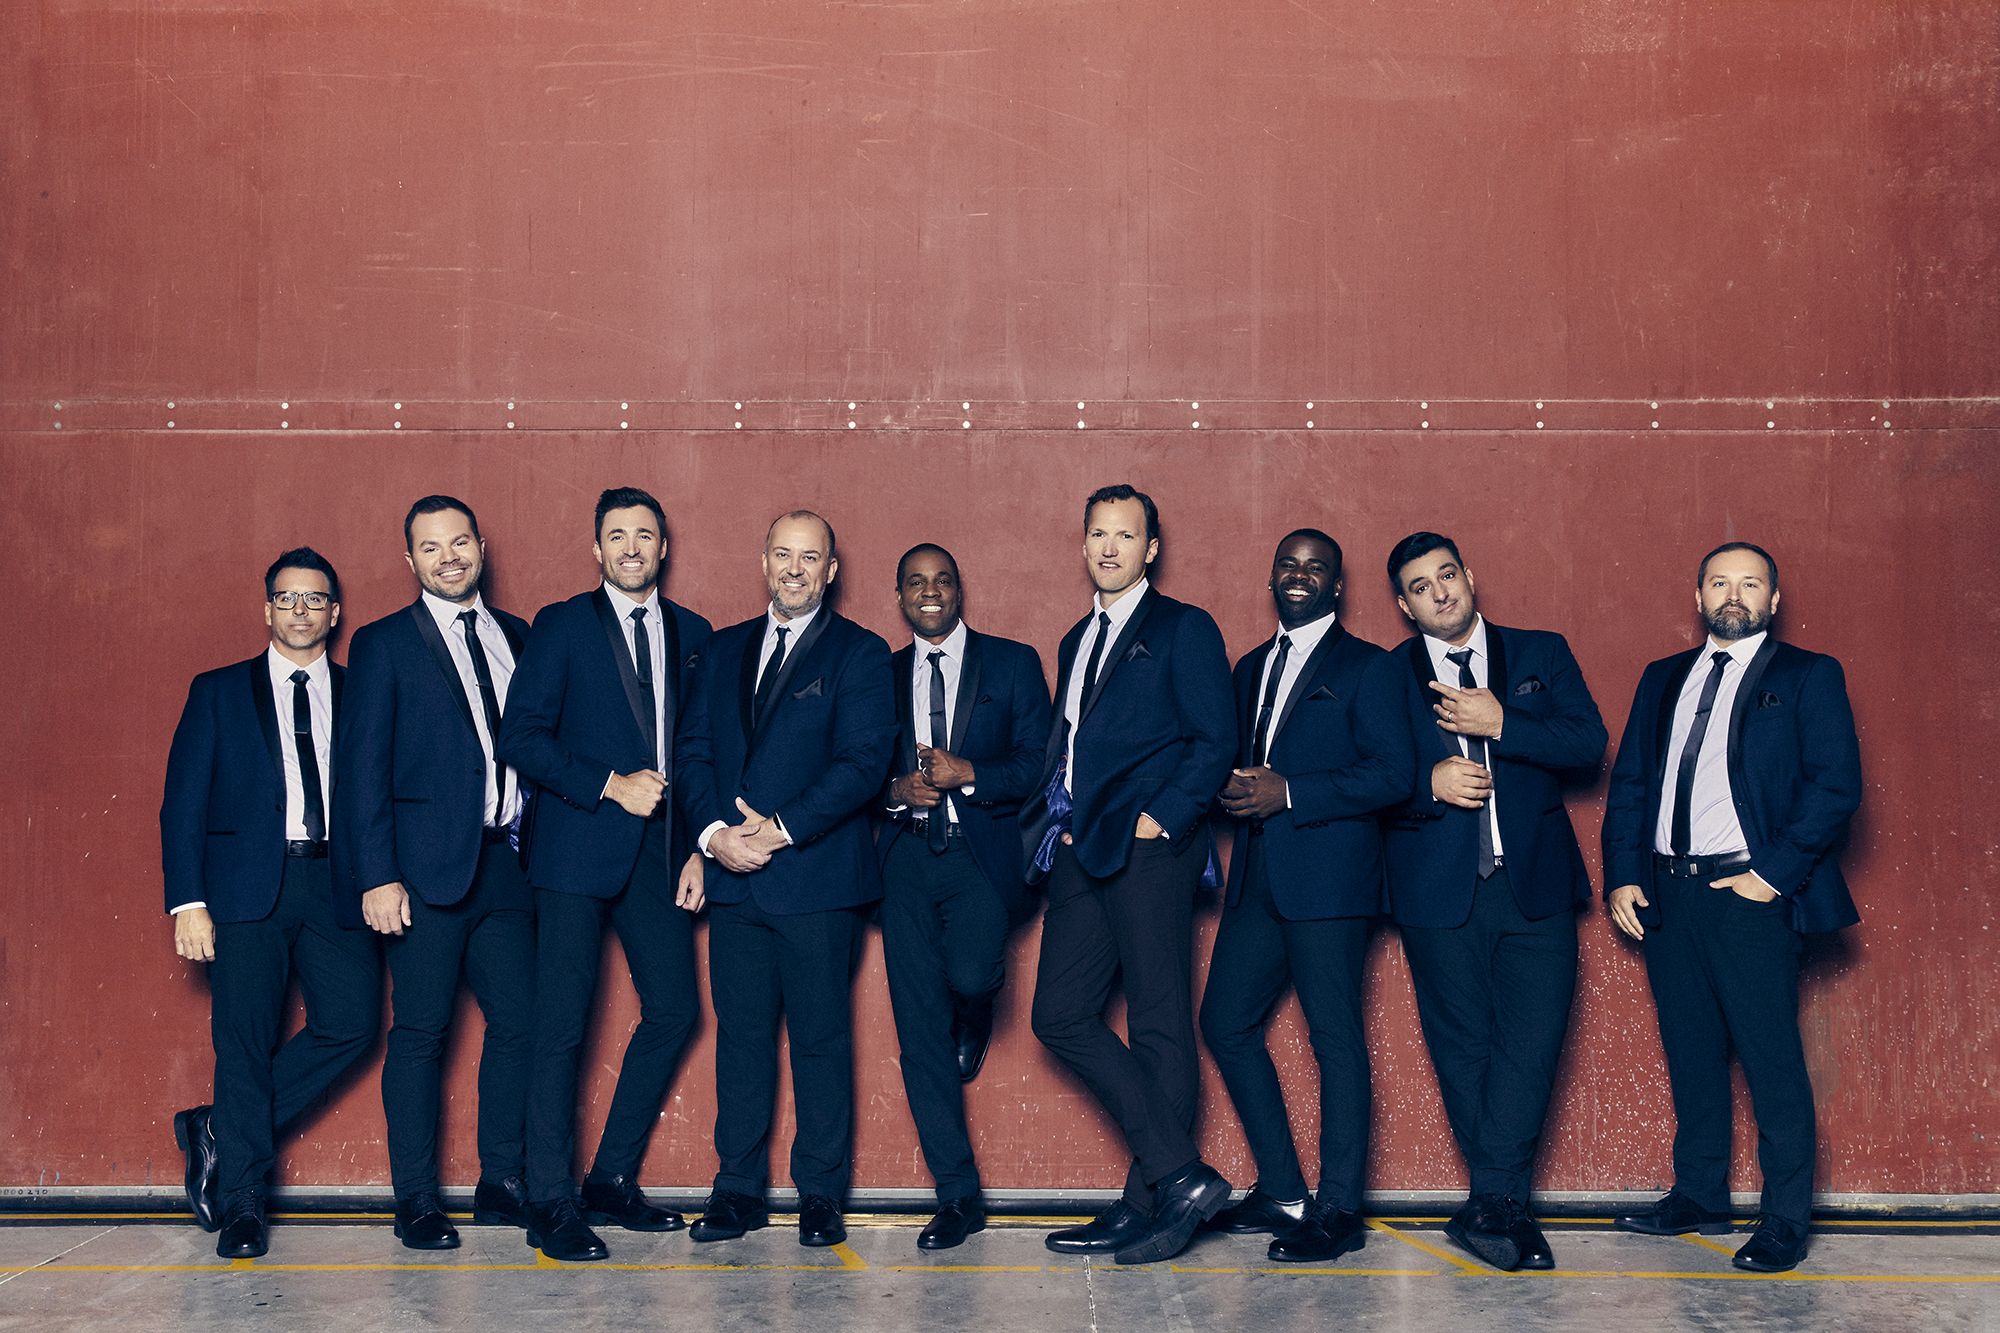 Straight No Chaser will perform at Keller Auditorium in Portland on New Year's Eve.